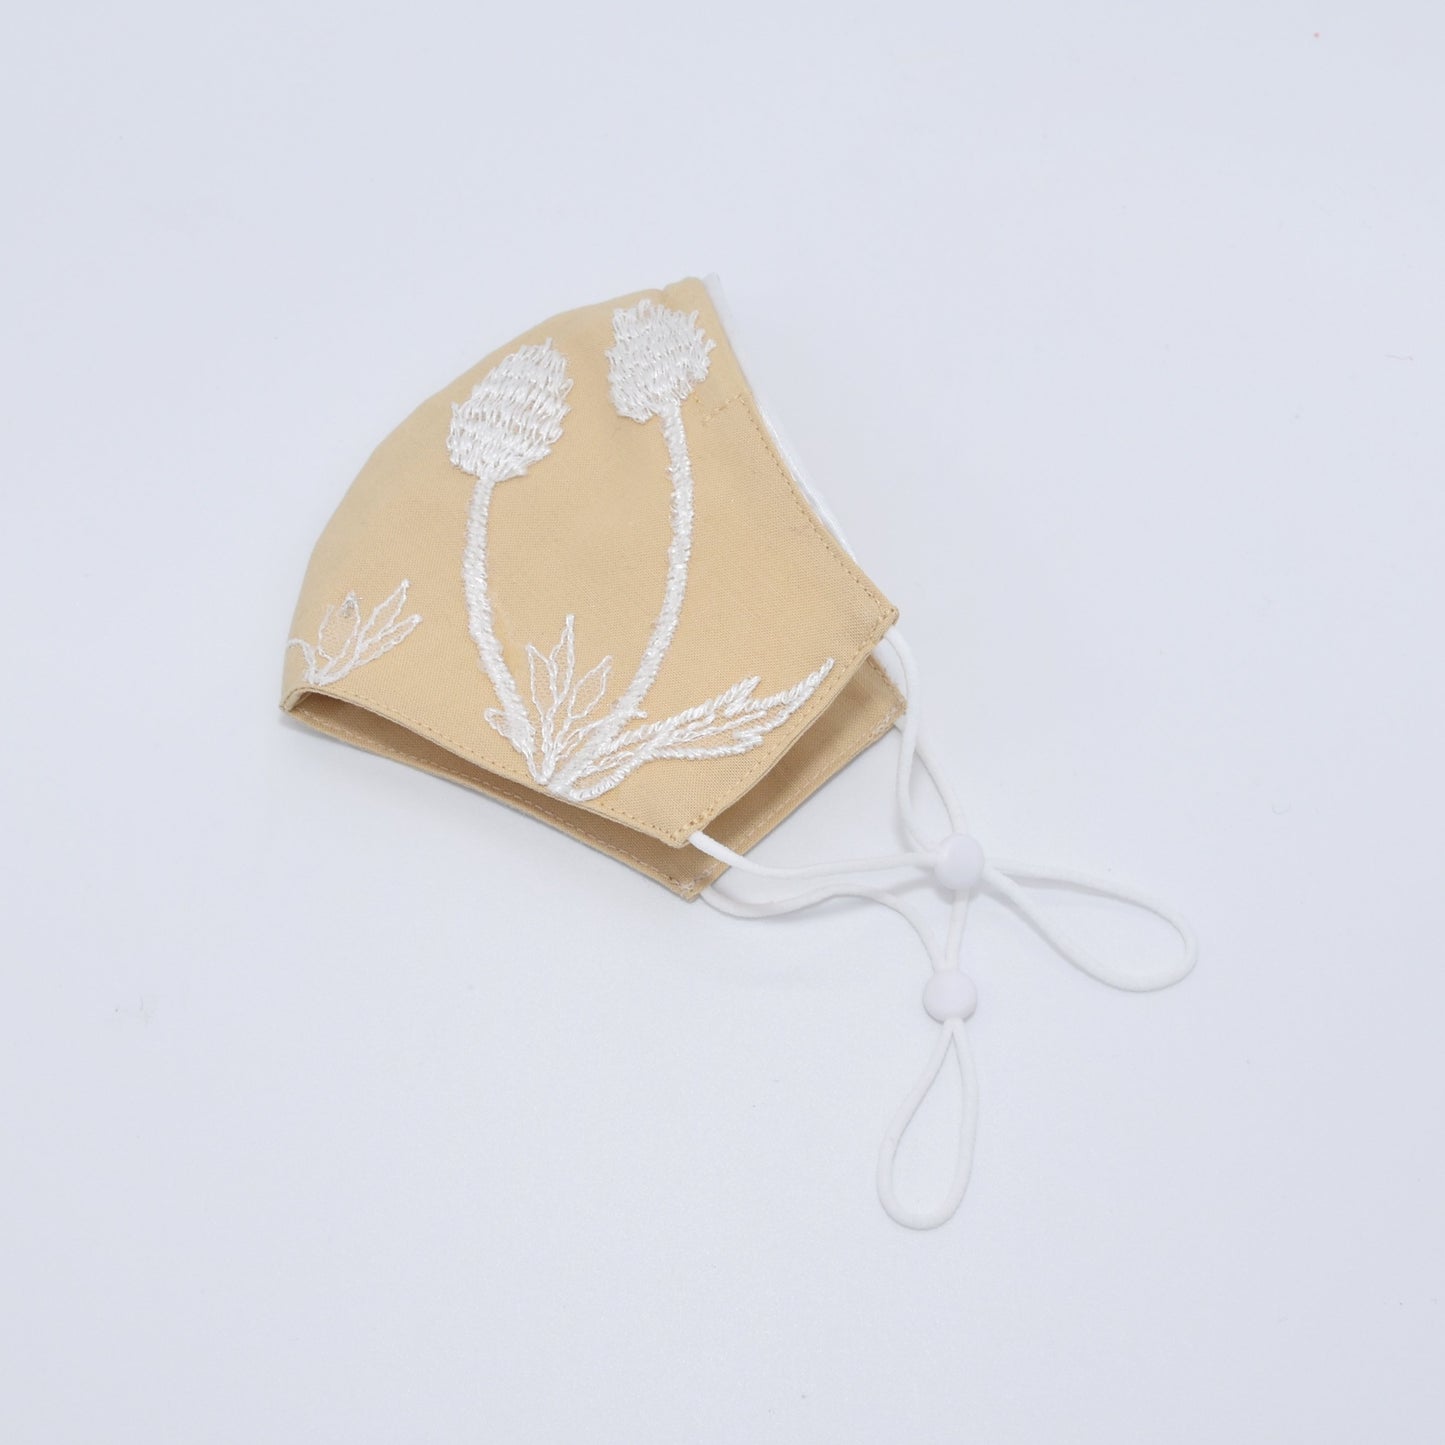 Wheat Beige Bridesmaid Face Mask with Embroidery Appliqué and White Satin Piping